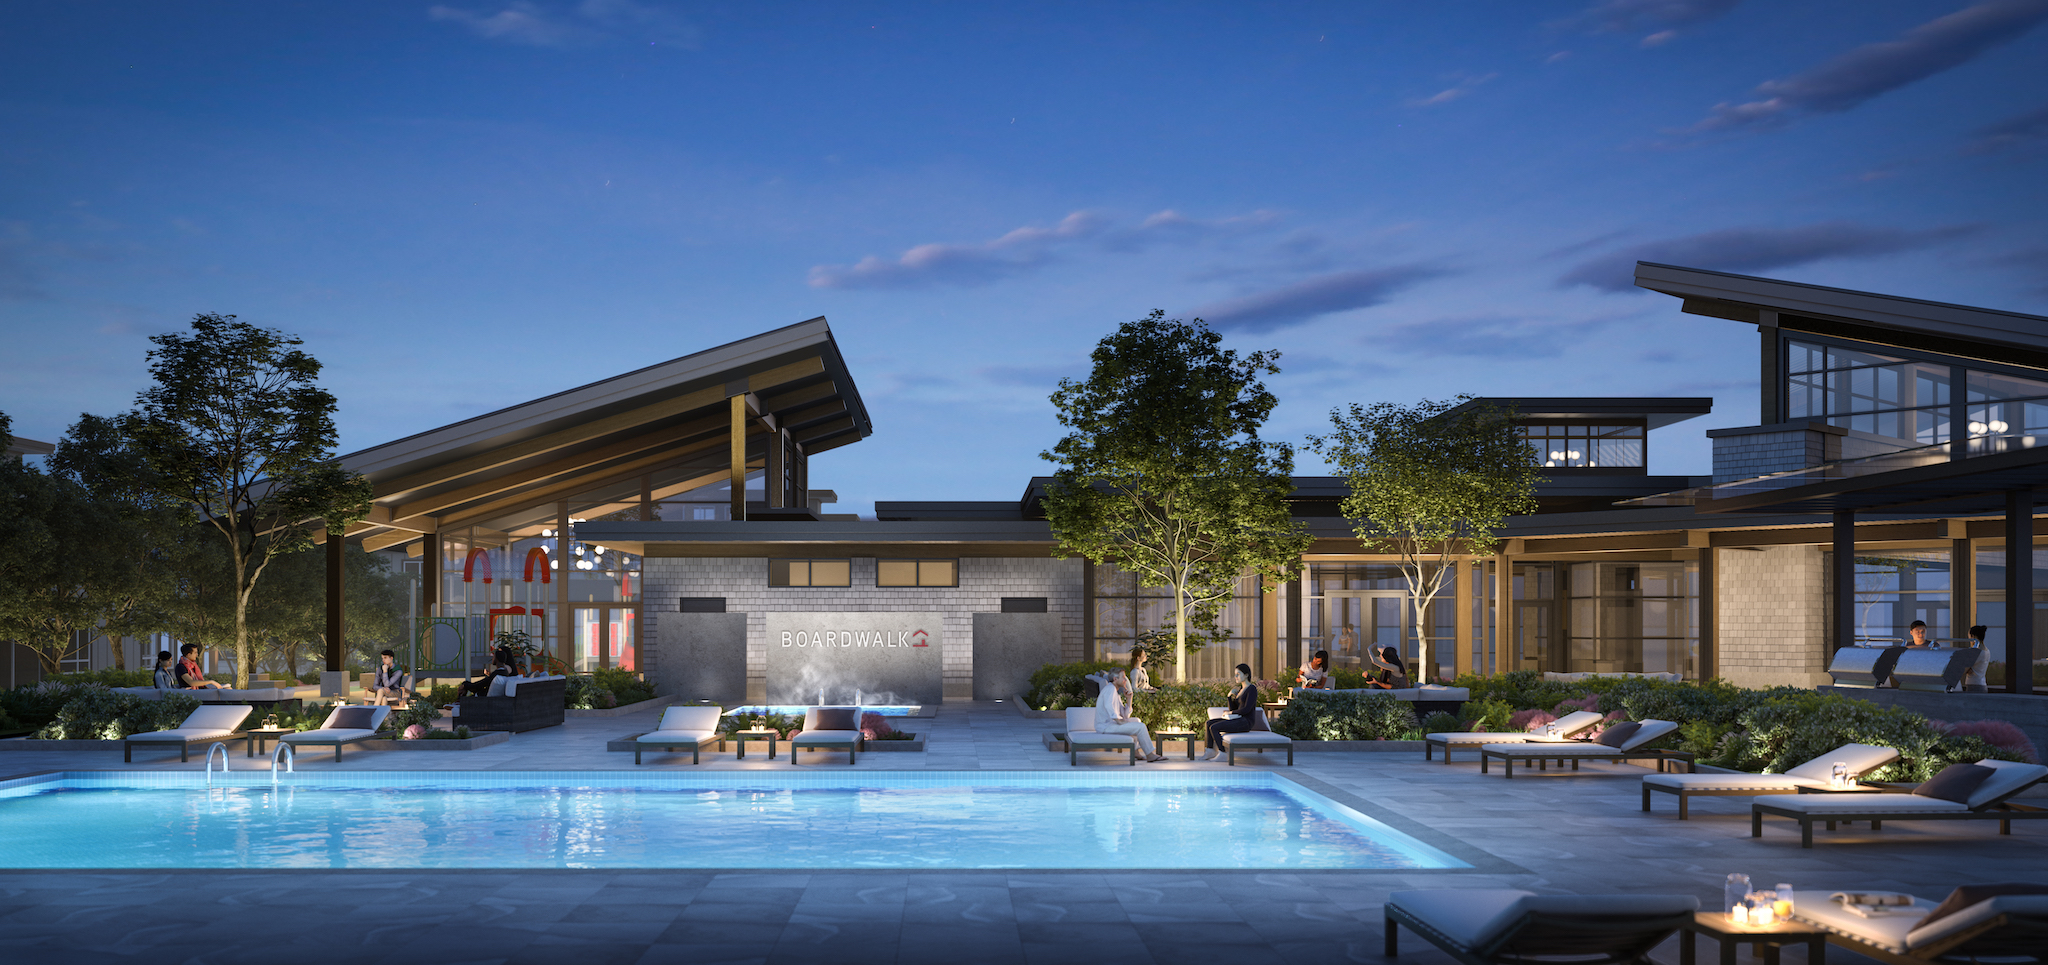 A 22,000-sq-ft beach resort-inspired clubhouse with a large outdoor swimming pool.